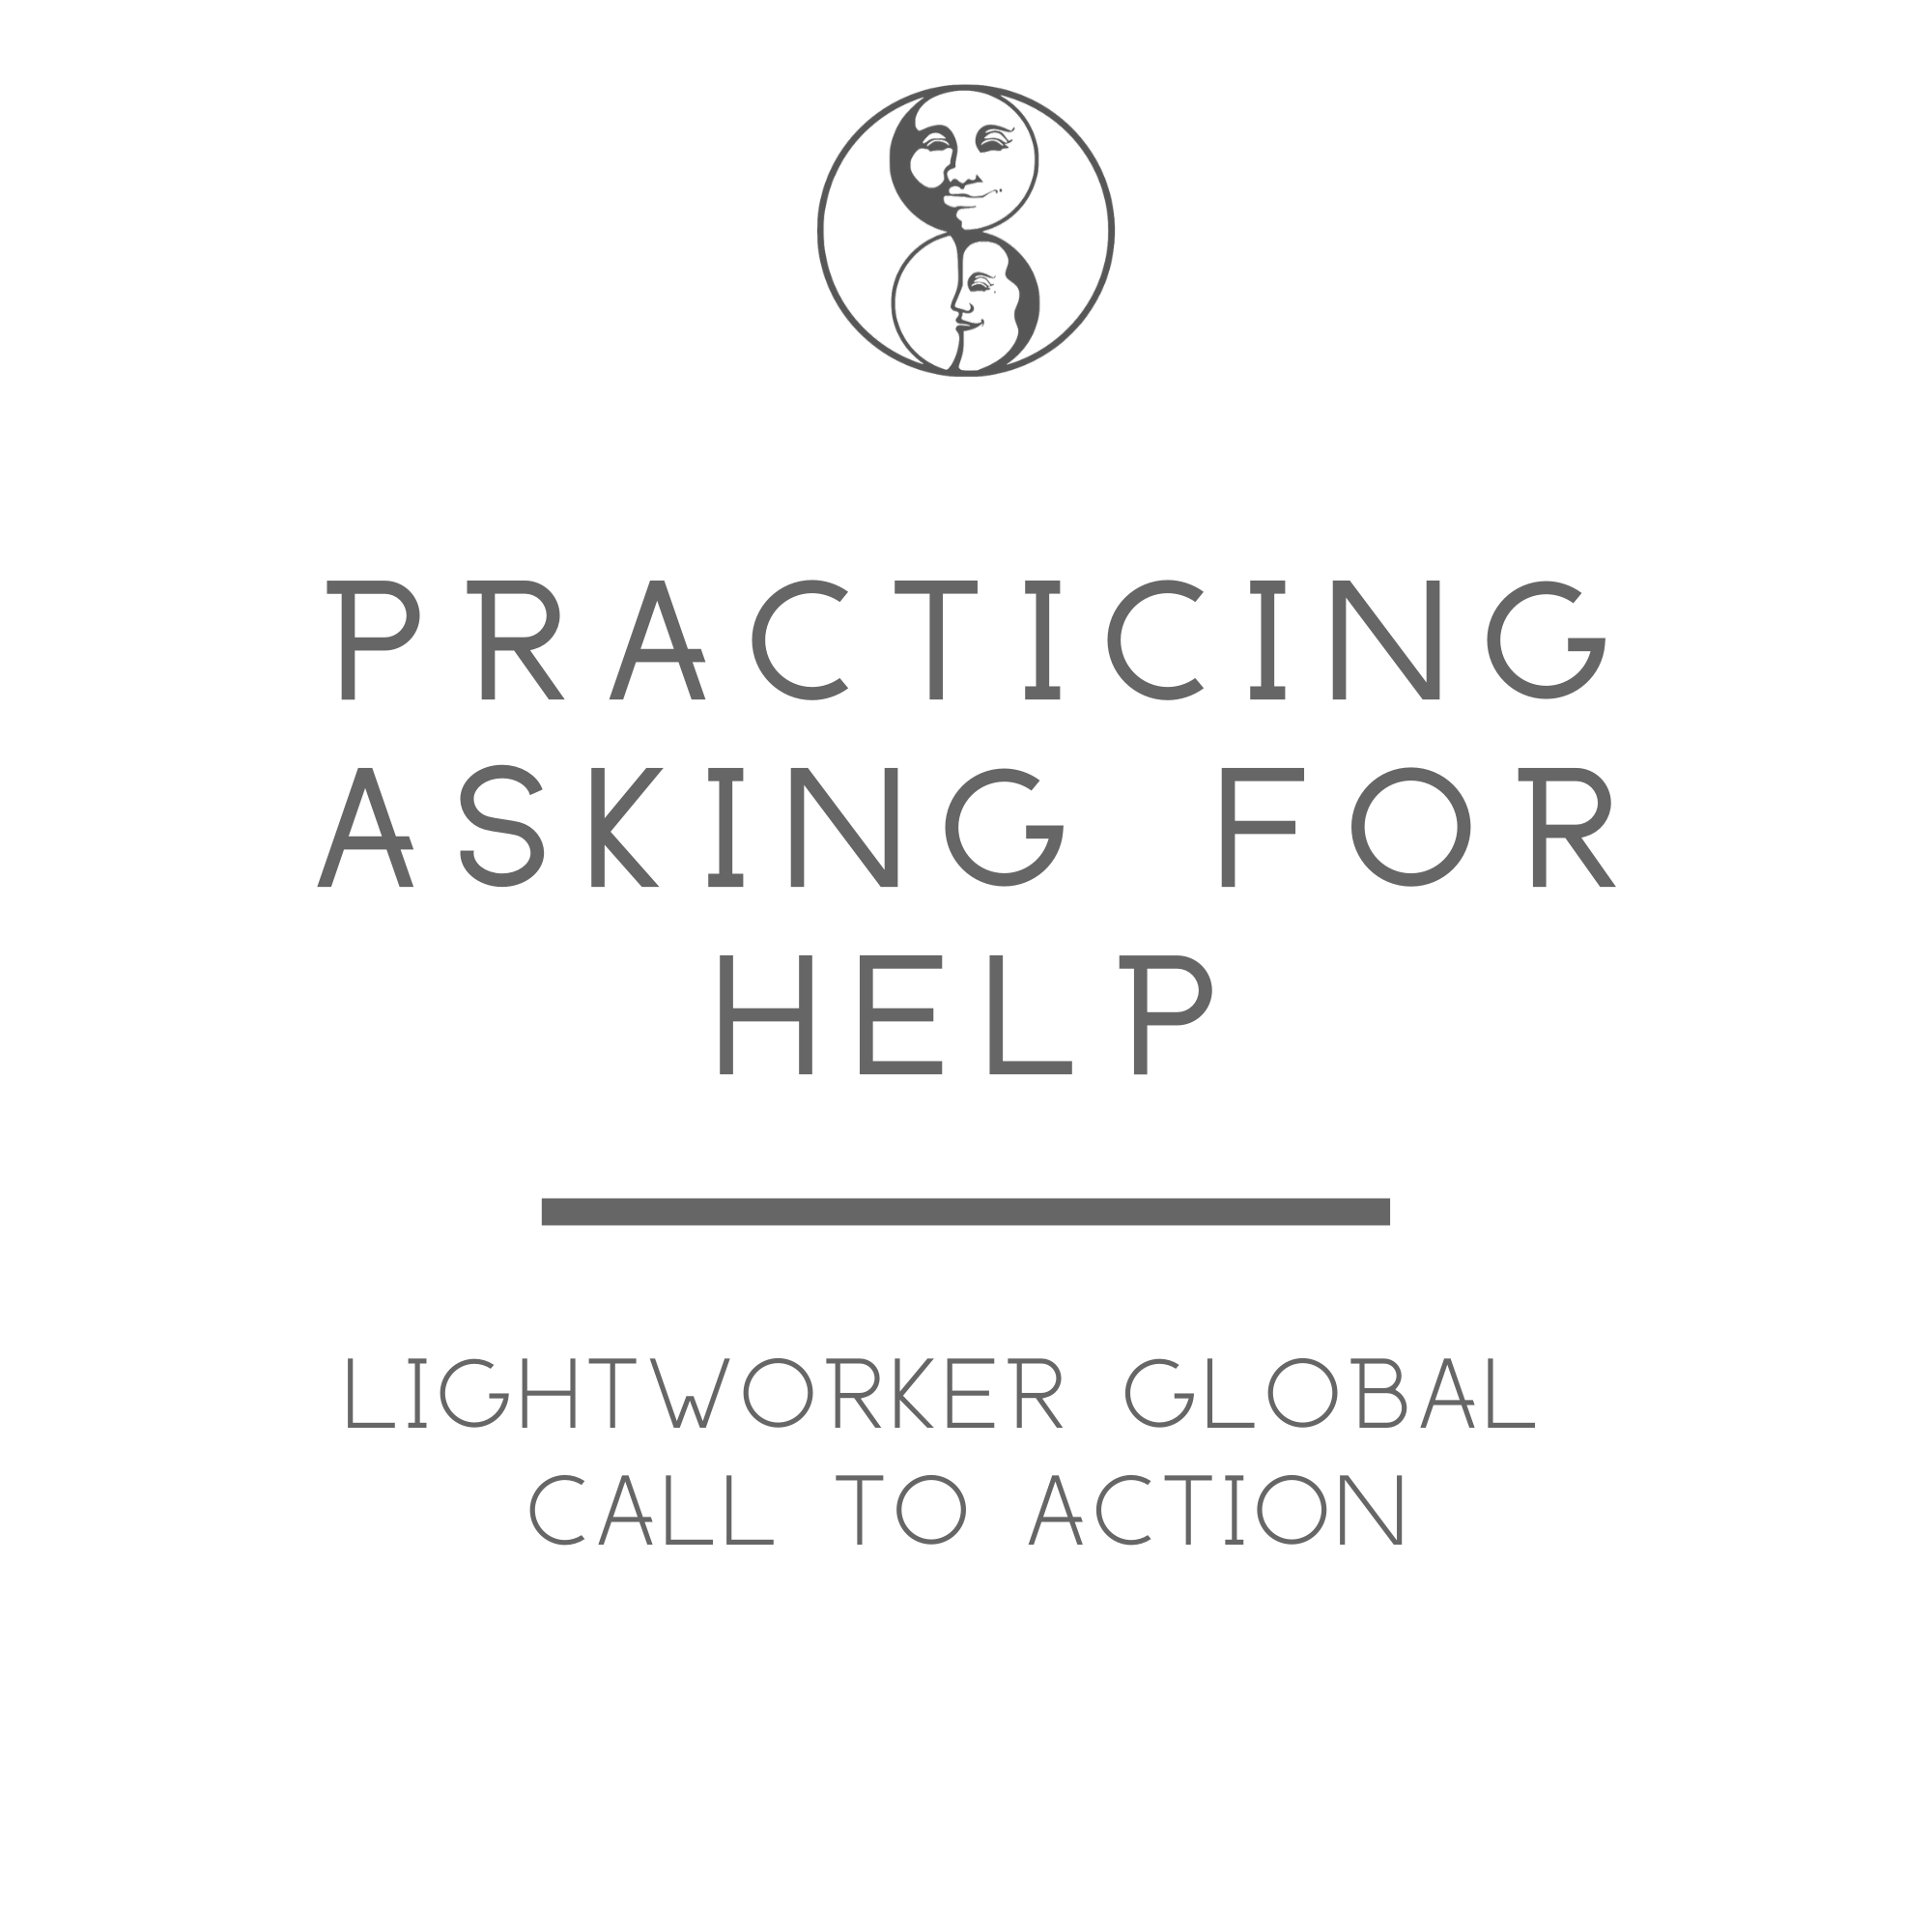 Practicing Asking For Help - Lightworker Global Call to Action